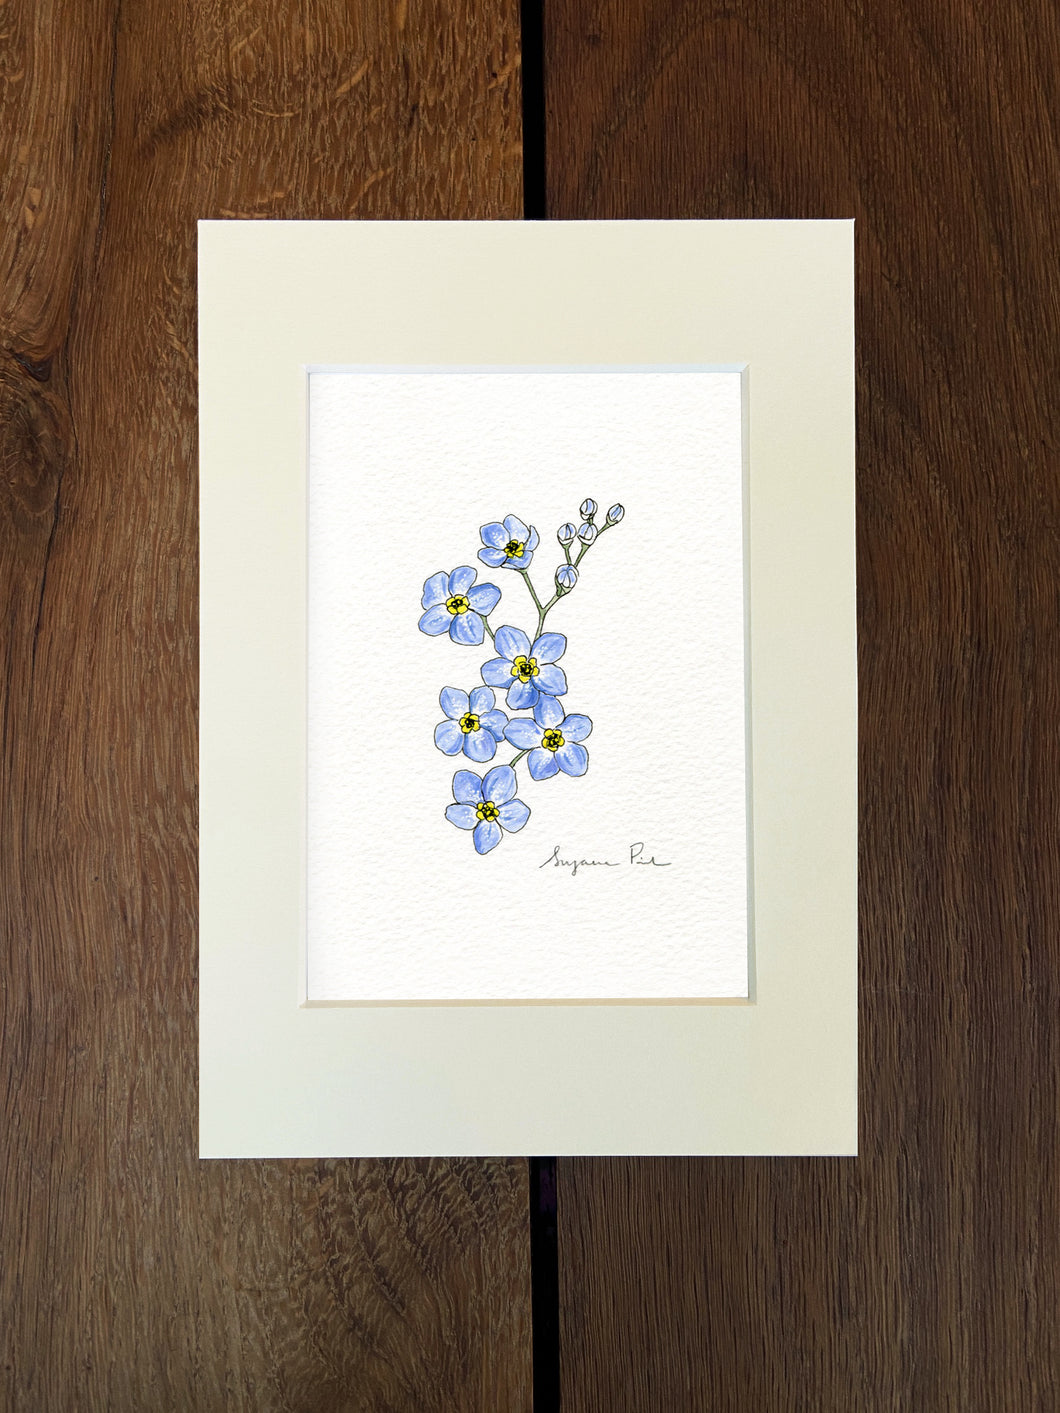 Handpainted forget-me-not design using fineliner, watercolour and white ink in an ivory mount on a wooden background.